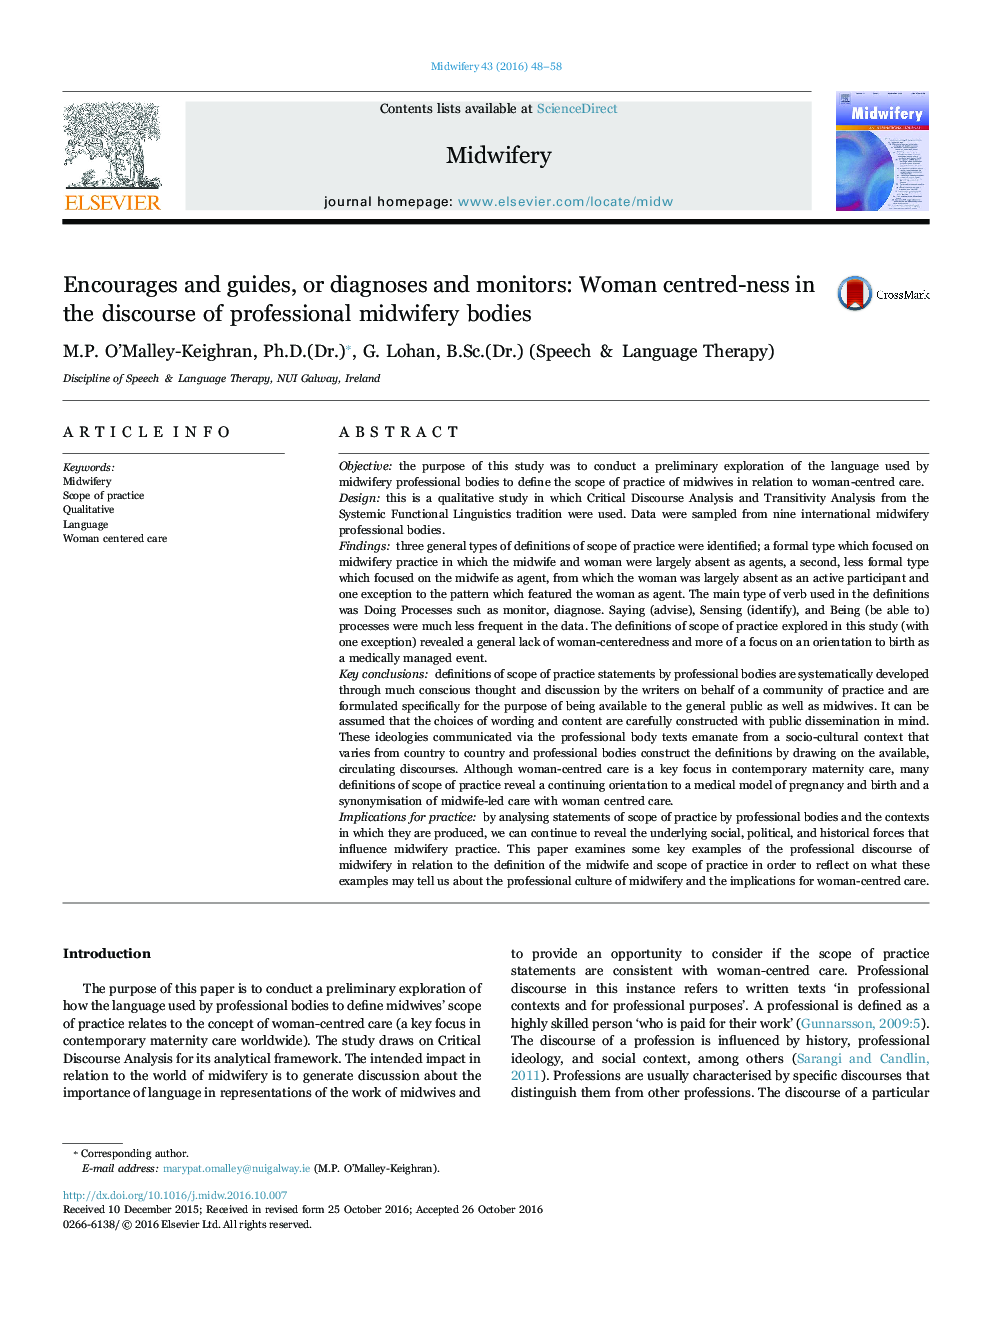 Encourages and guides, or diagnoses and monitors: Woman centred-ness in the discourse of professional midwifery bodies